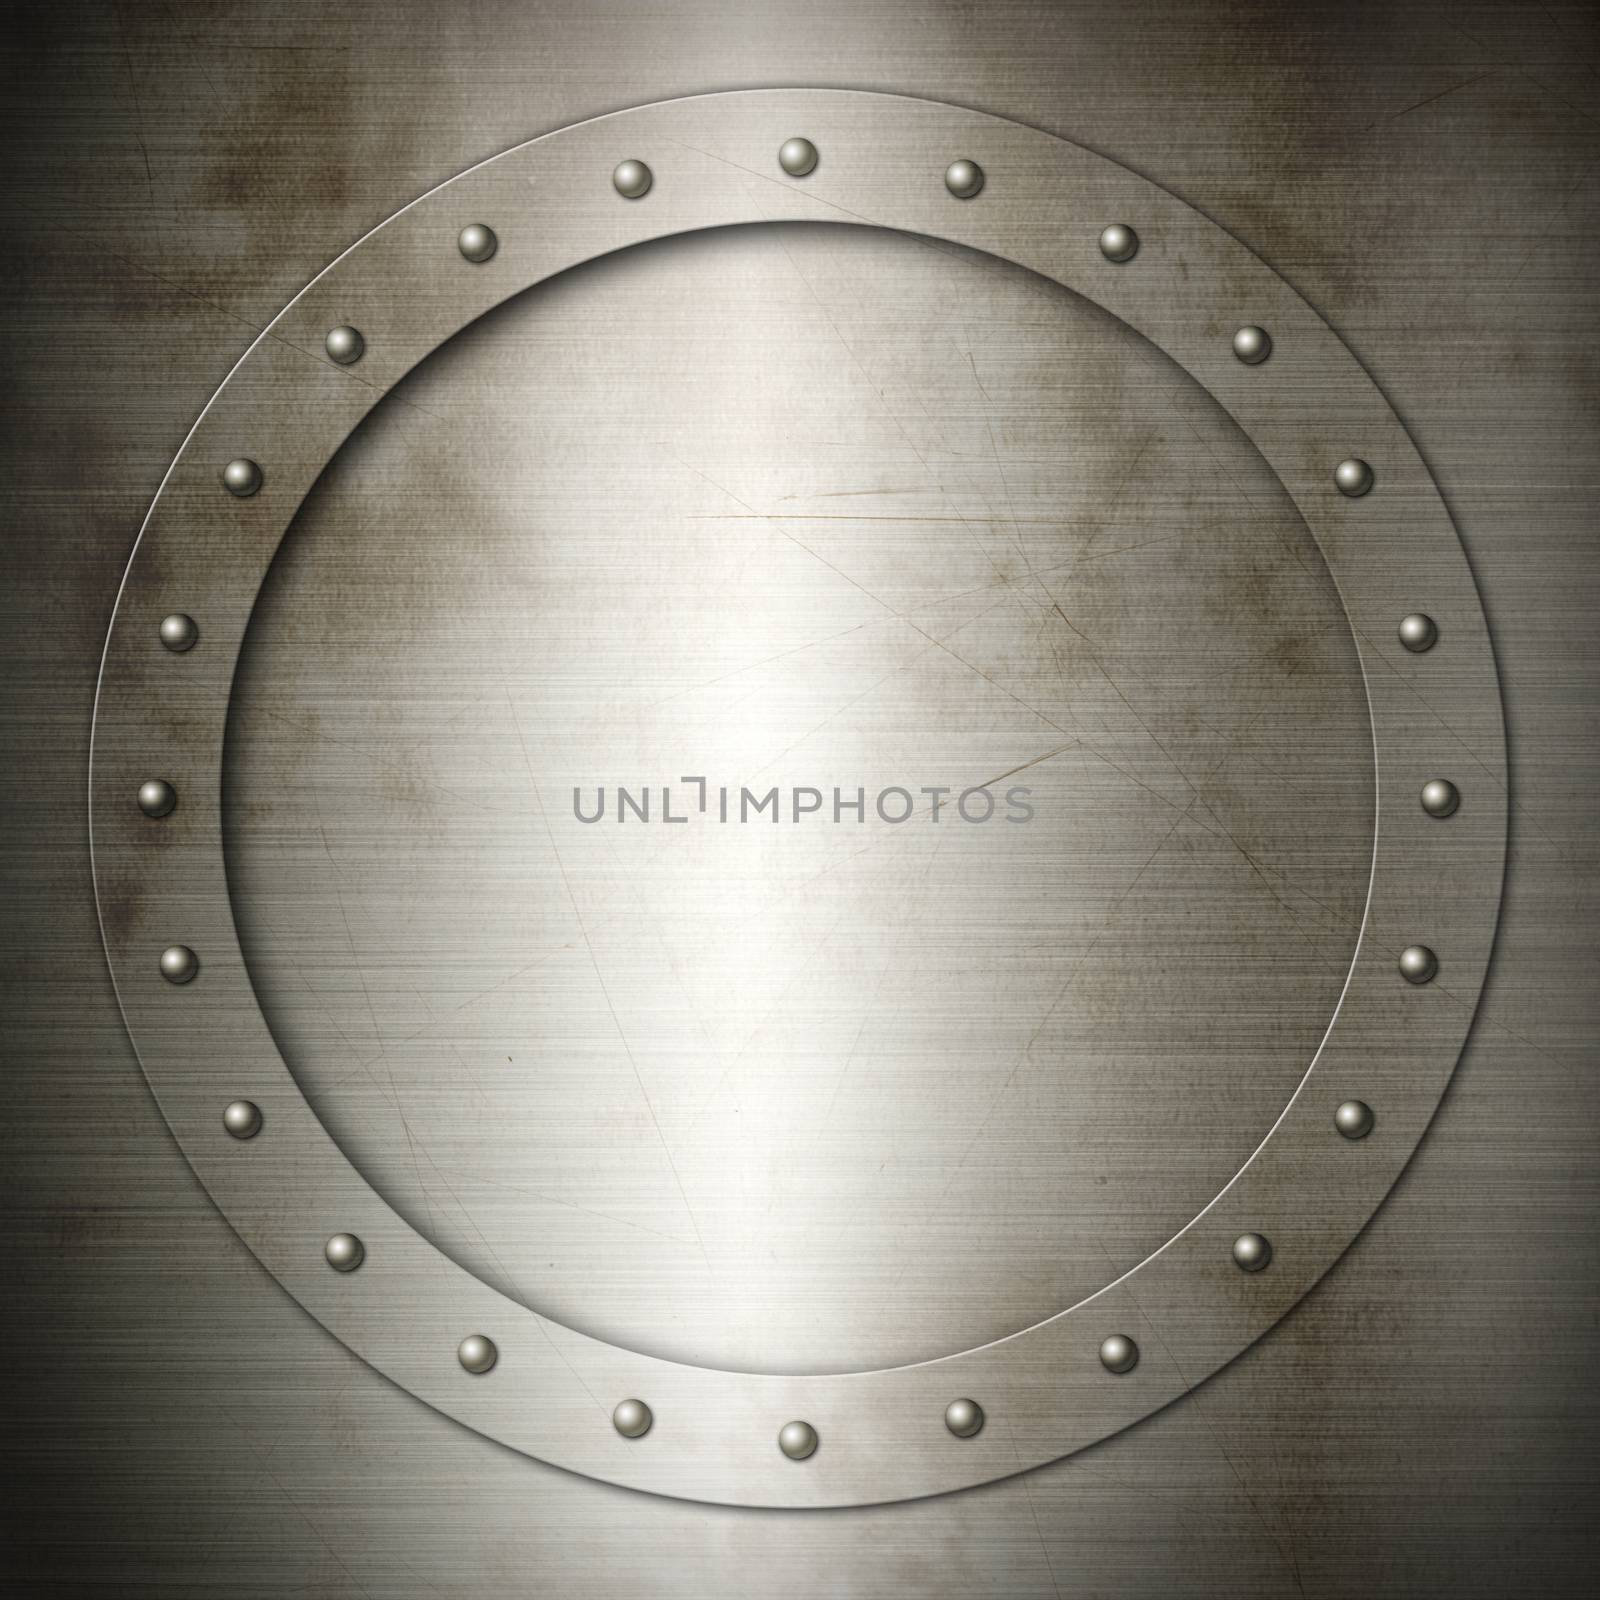 Old brushed Steel round frame background texture wallpaper